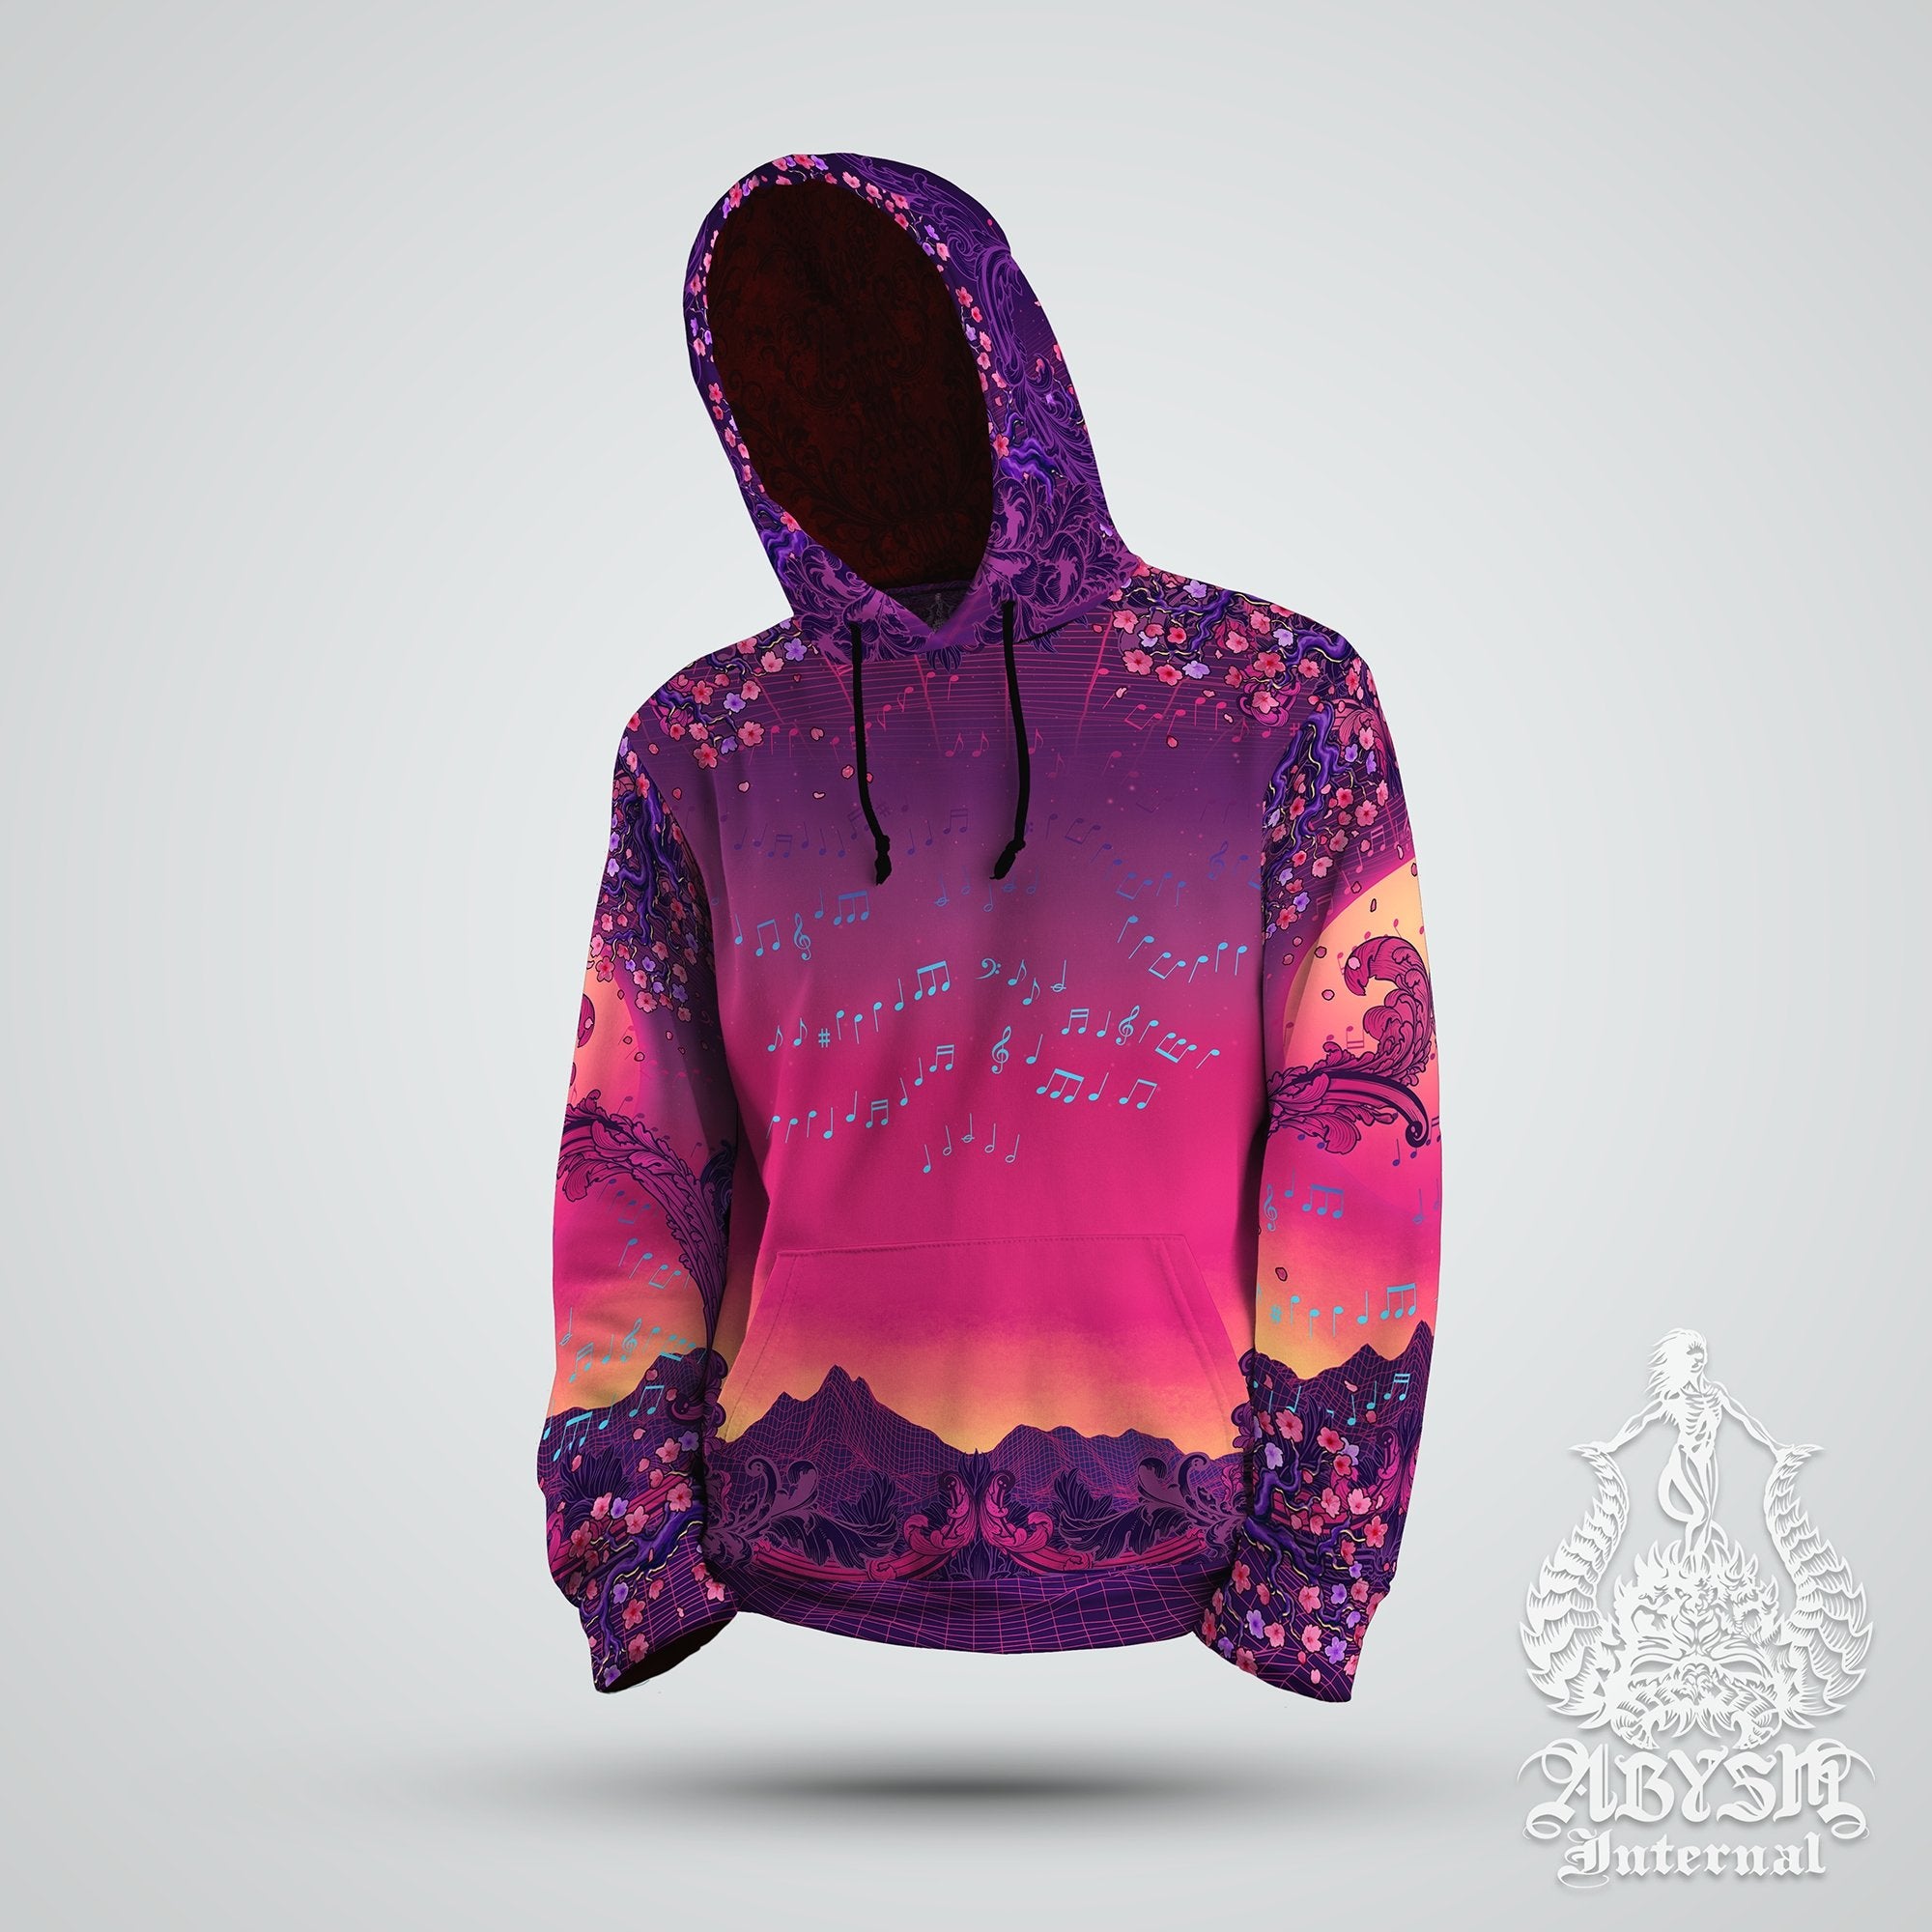 Synthwave Hoodie, Trippy Outfit, Vaporwave Dragon Streetwear, Psychedelic Music Festival, Gamer 80s Alternative Clothing, Unisex - Retrowave - Abysm Internal